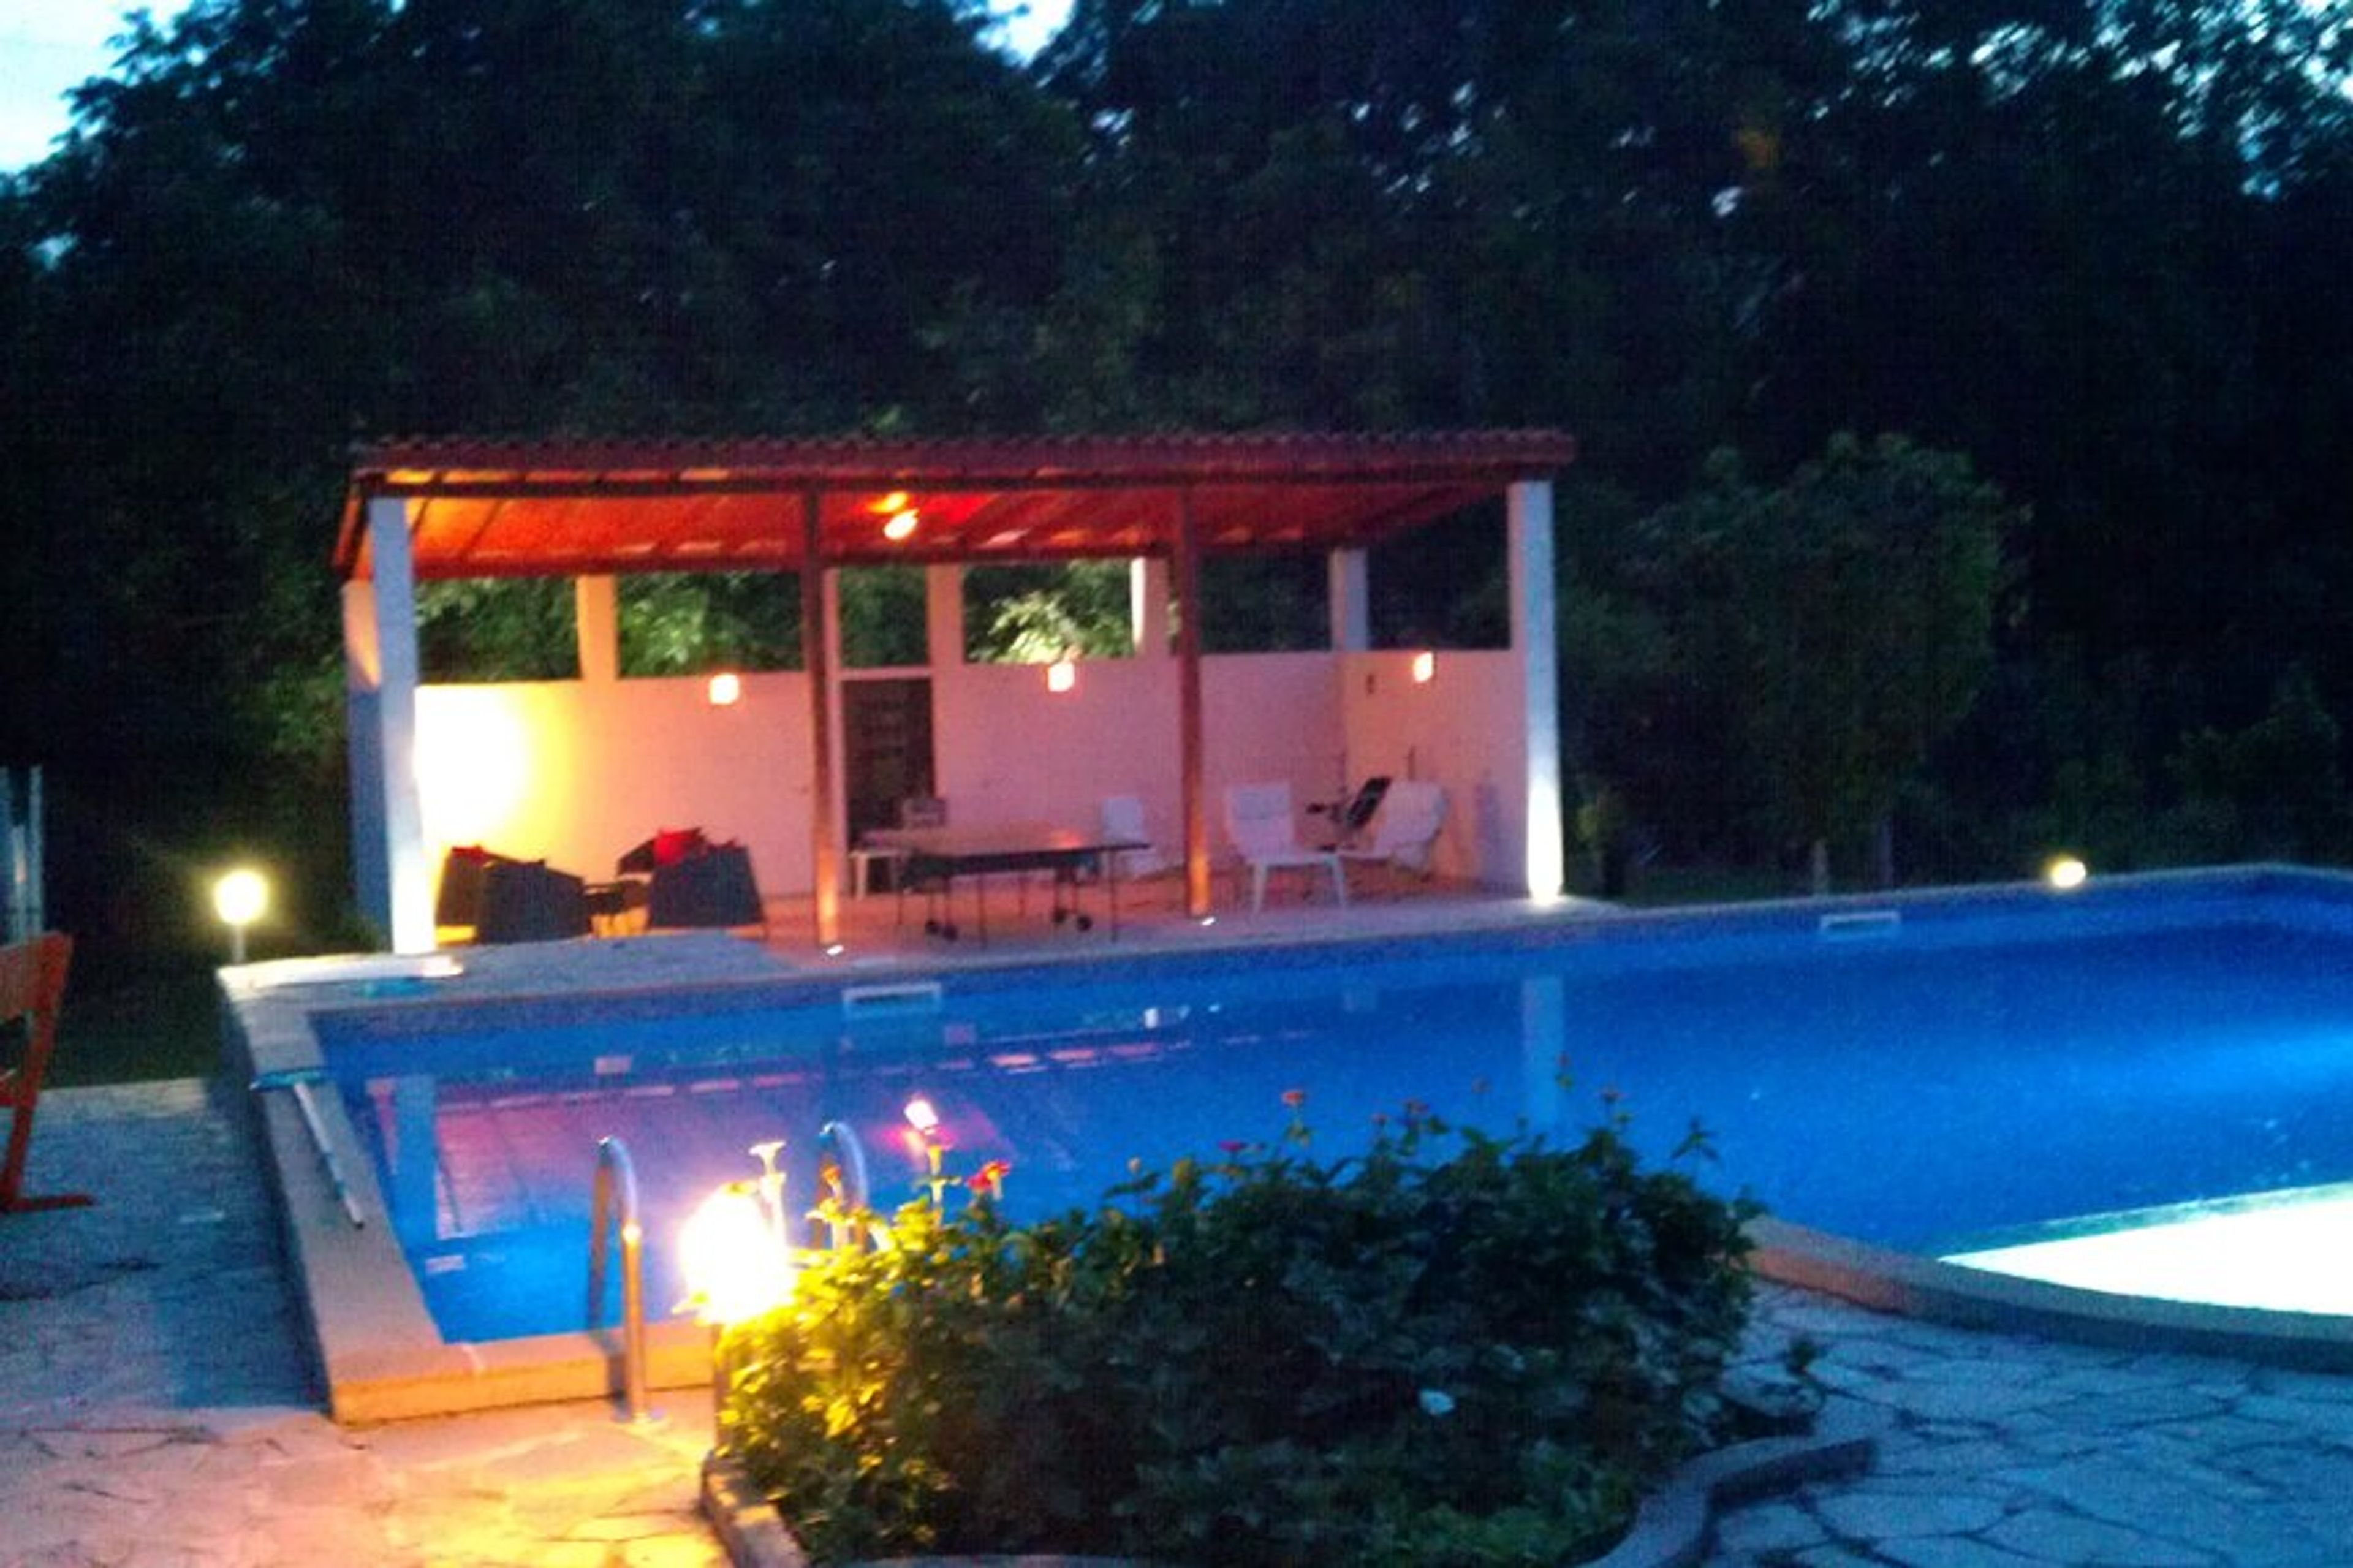 The Pool and Summerhouse in the evening